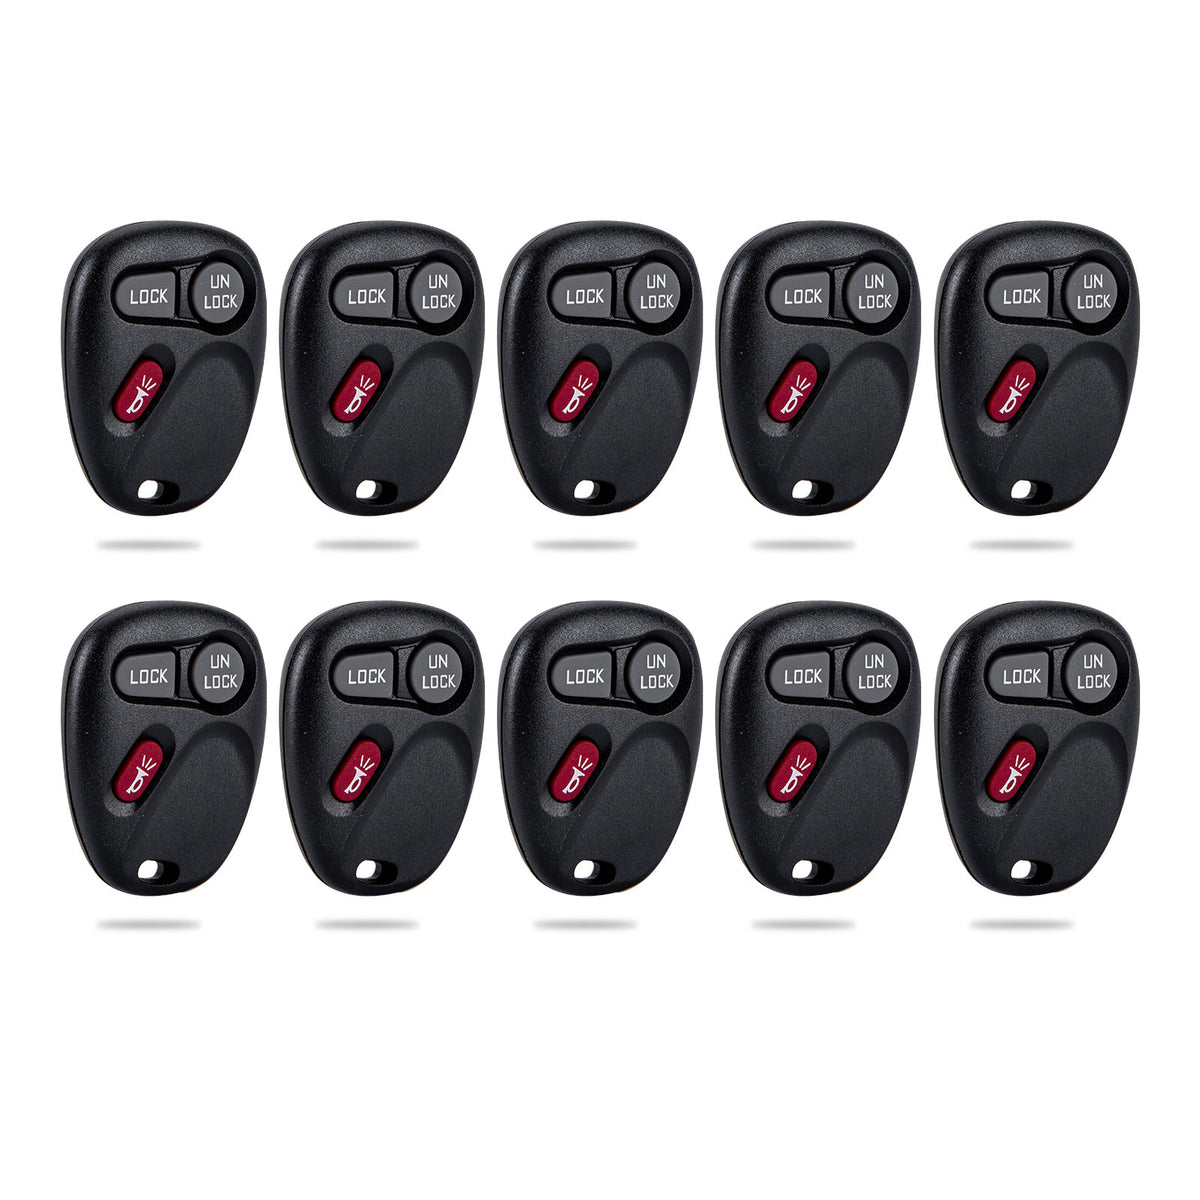 Lots of 10 Car Remote Fob Replacement for KOBUT1BT 15732803 fits 2000 2001 Chevy Tahoe 3 Button